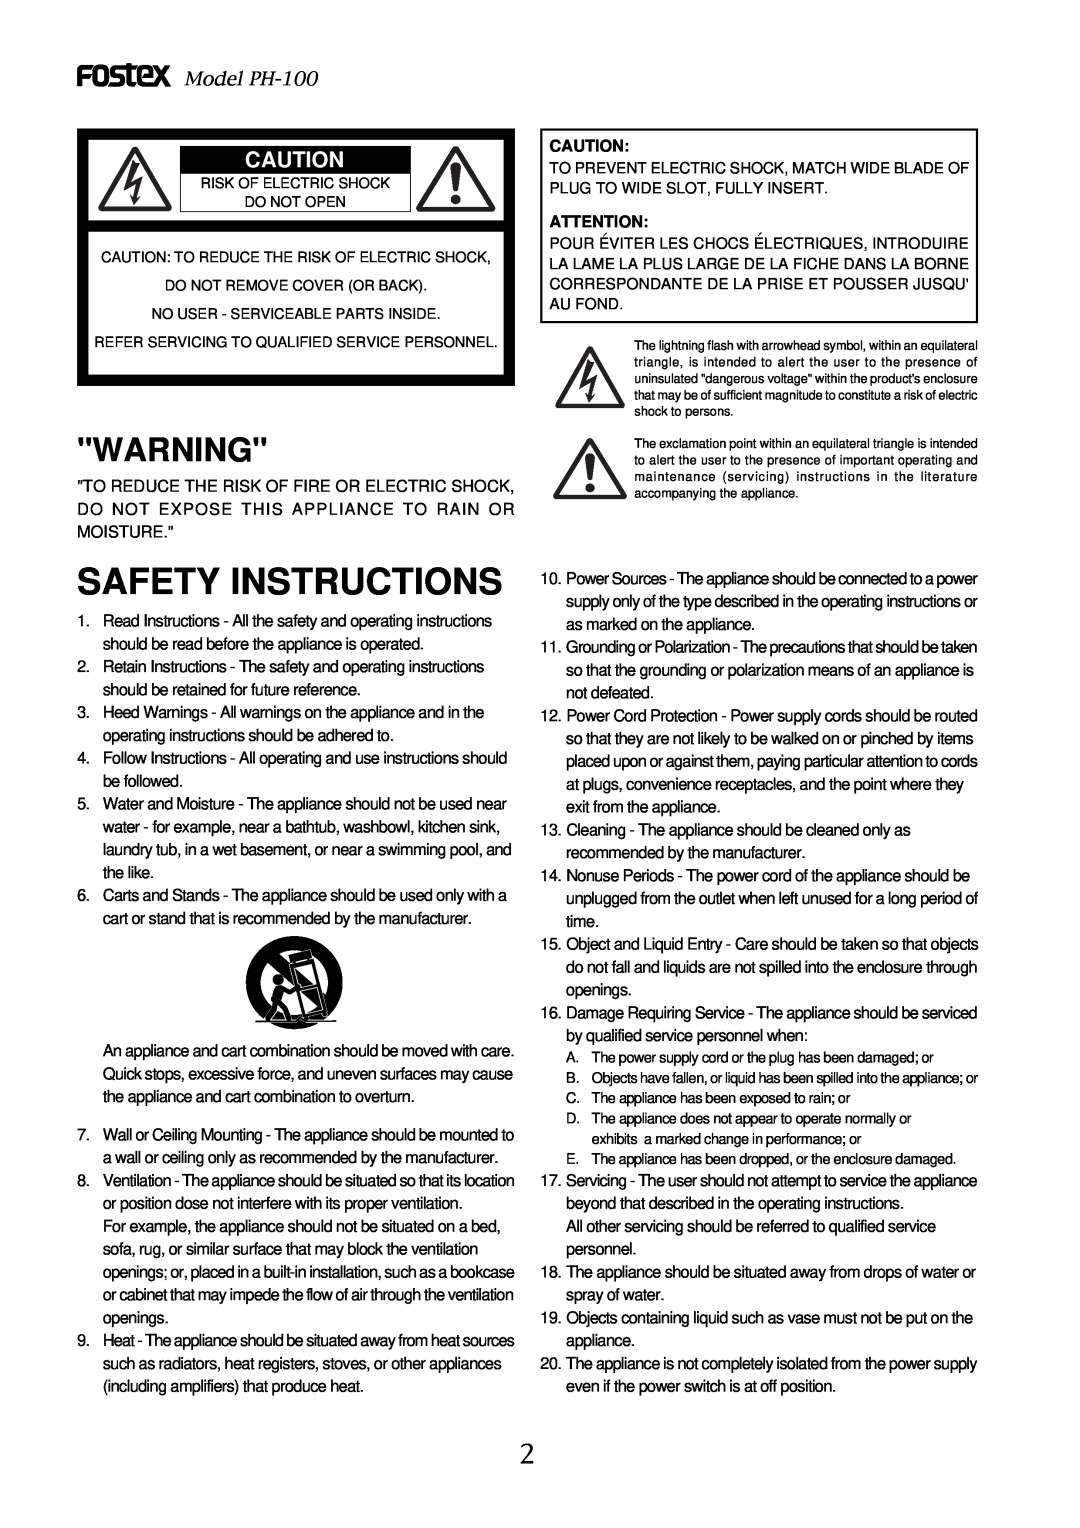 Fostex owner manual Model PH-100, Safety Instructions 